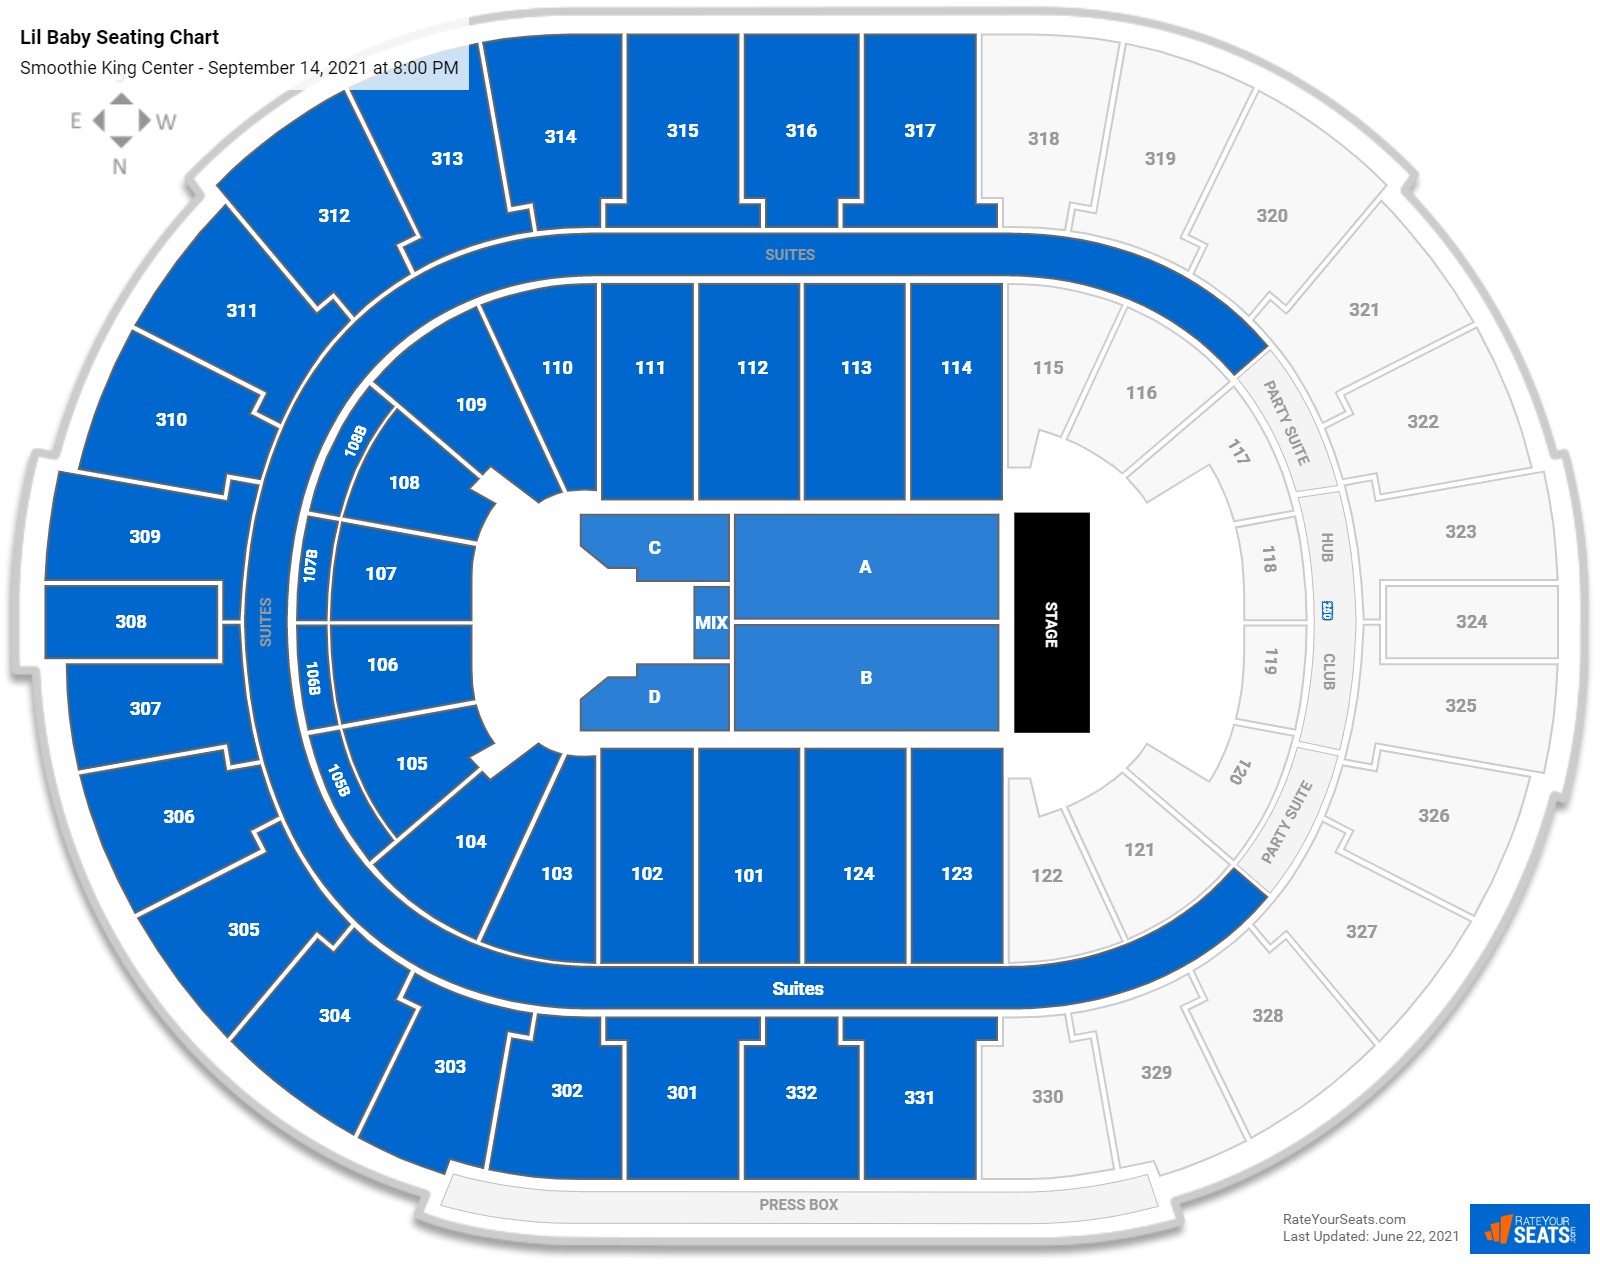 Smoothie King Center Seating Charts for Concerts